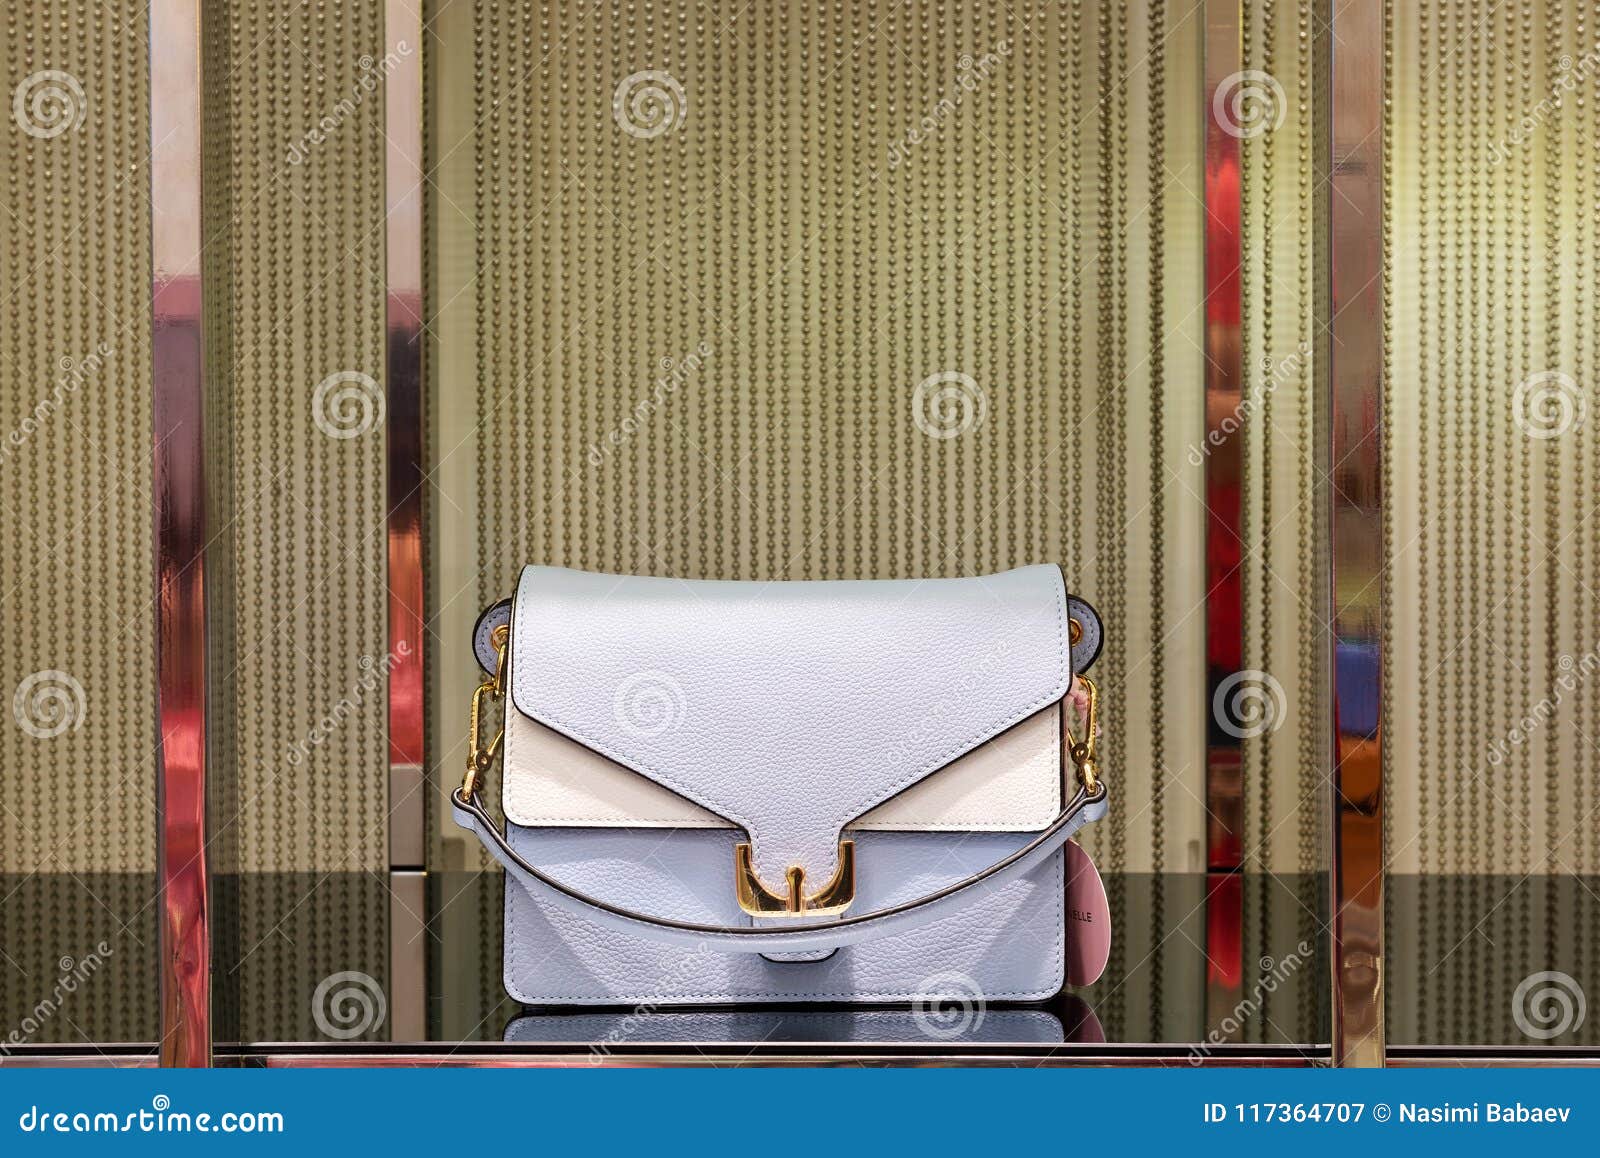 Woman Handbag in a Showcase of a Luxury Store. Stock Image - Image of ...